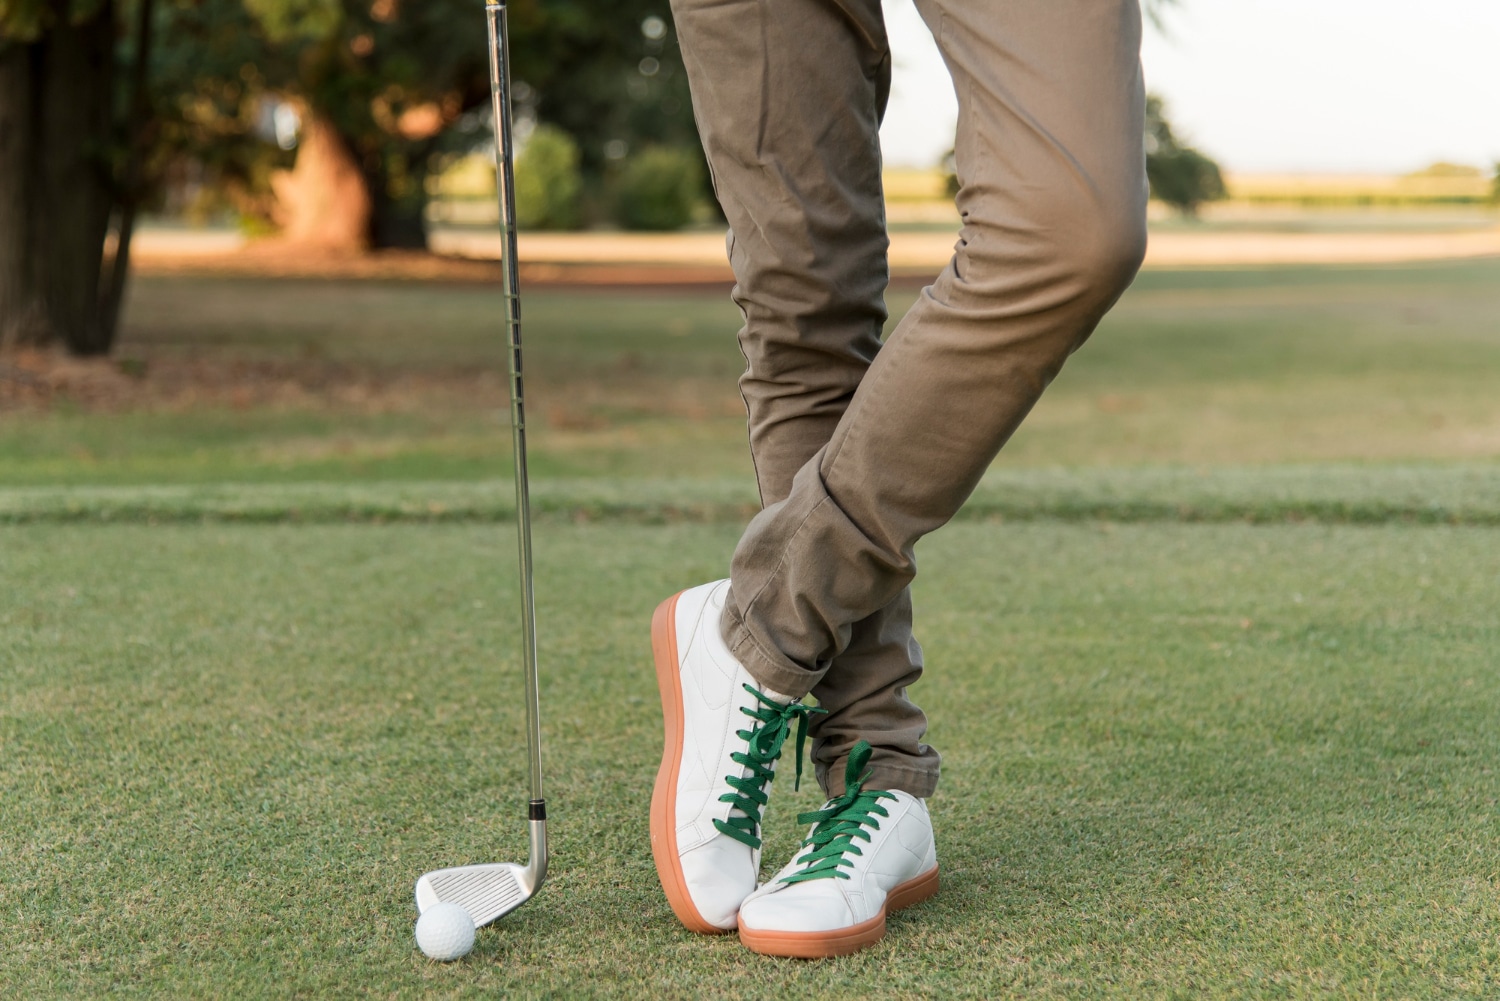 Walk The Course In Style With TRUE linkswear’s Golf Shoes